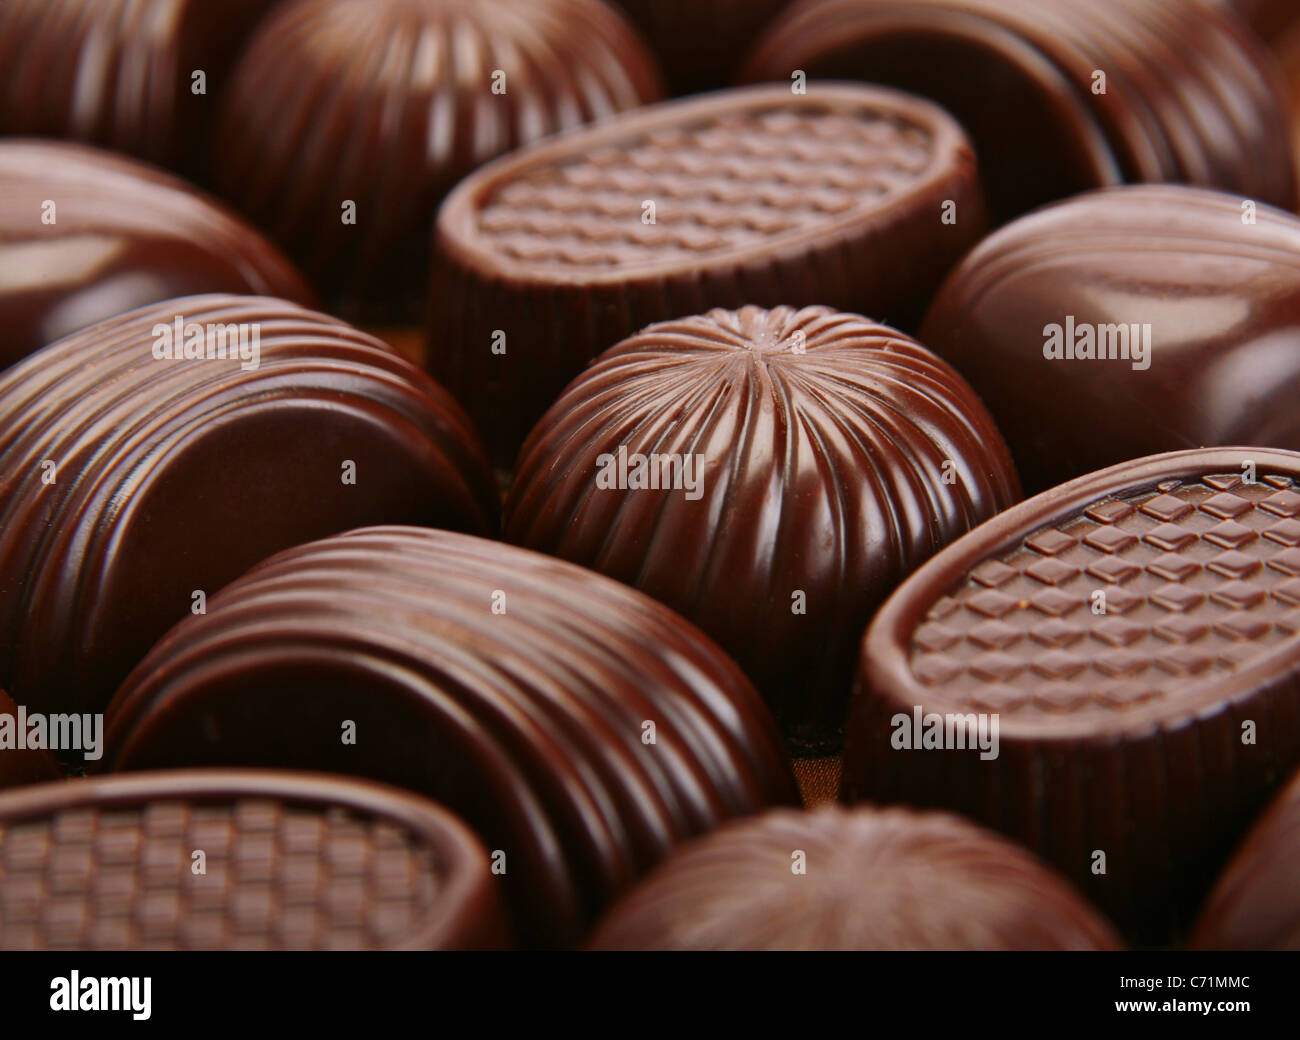 Closeup brown chocolate candy background Stock Photo